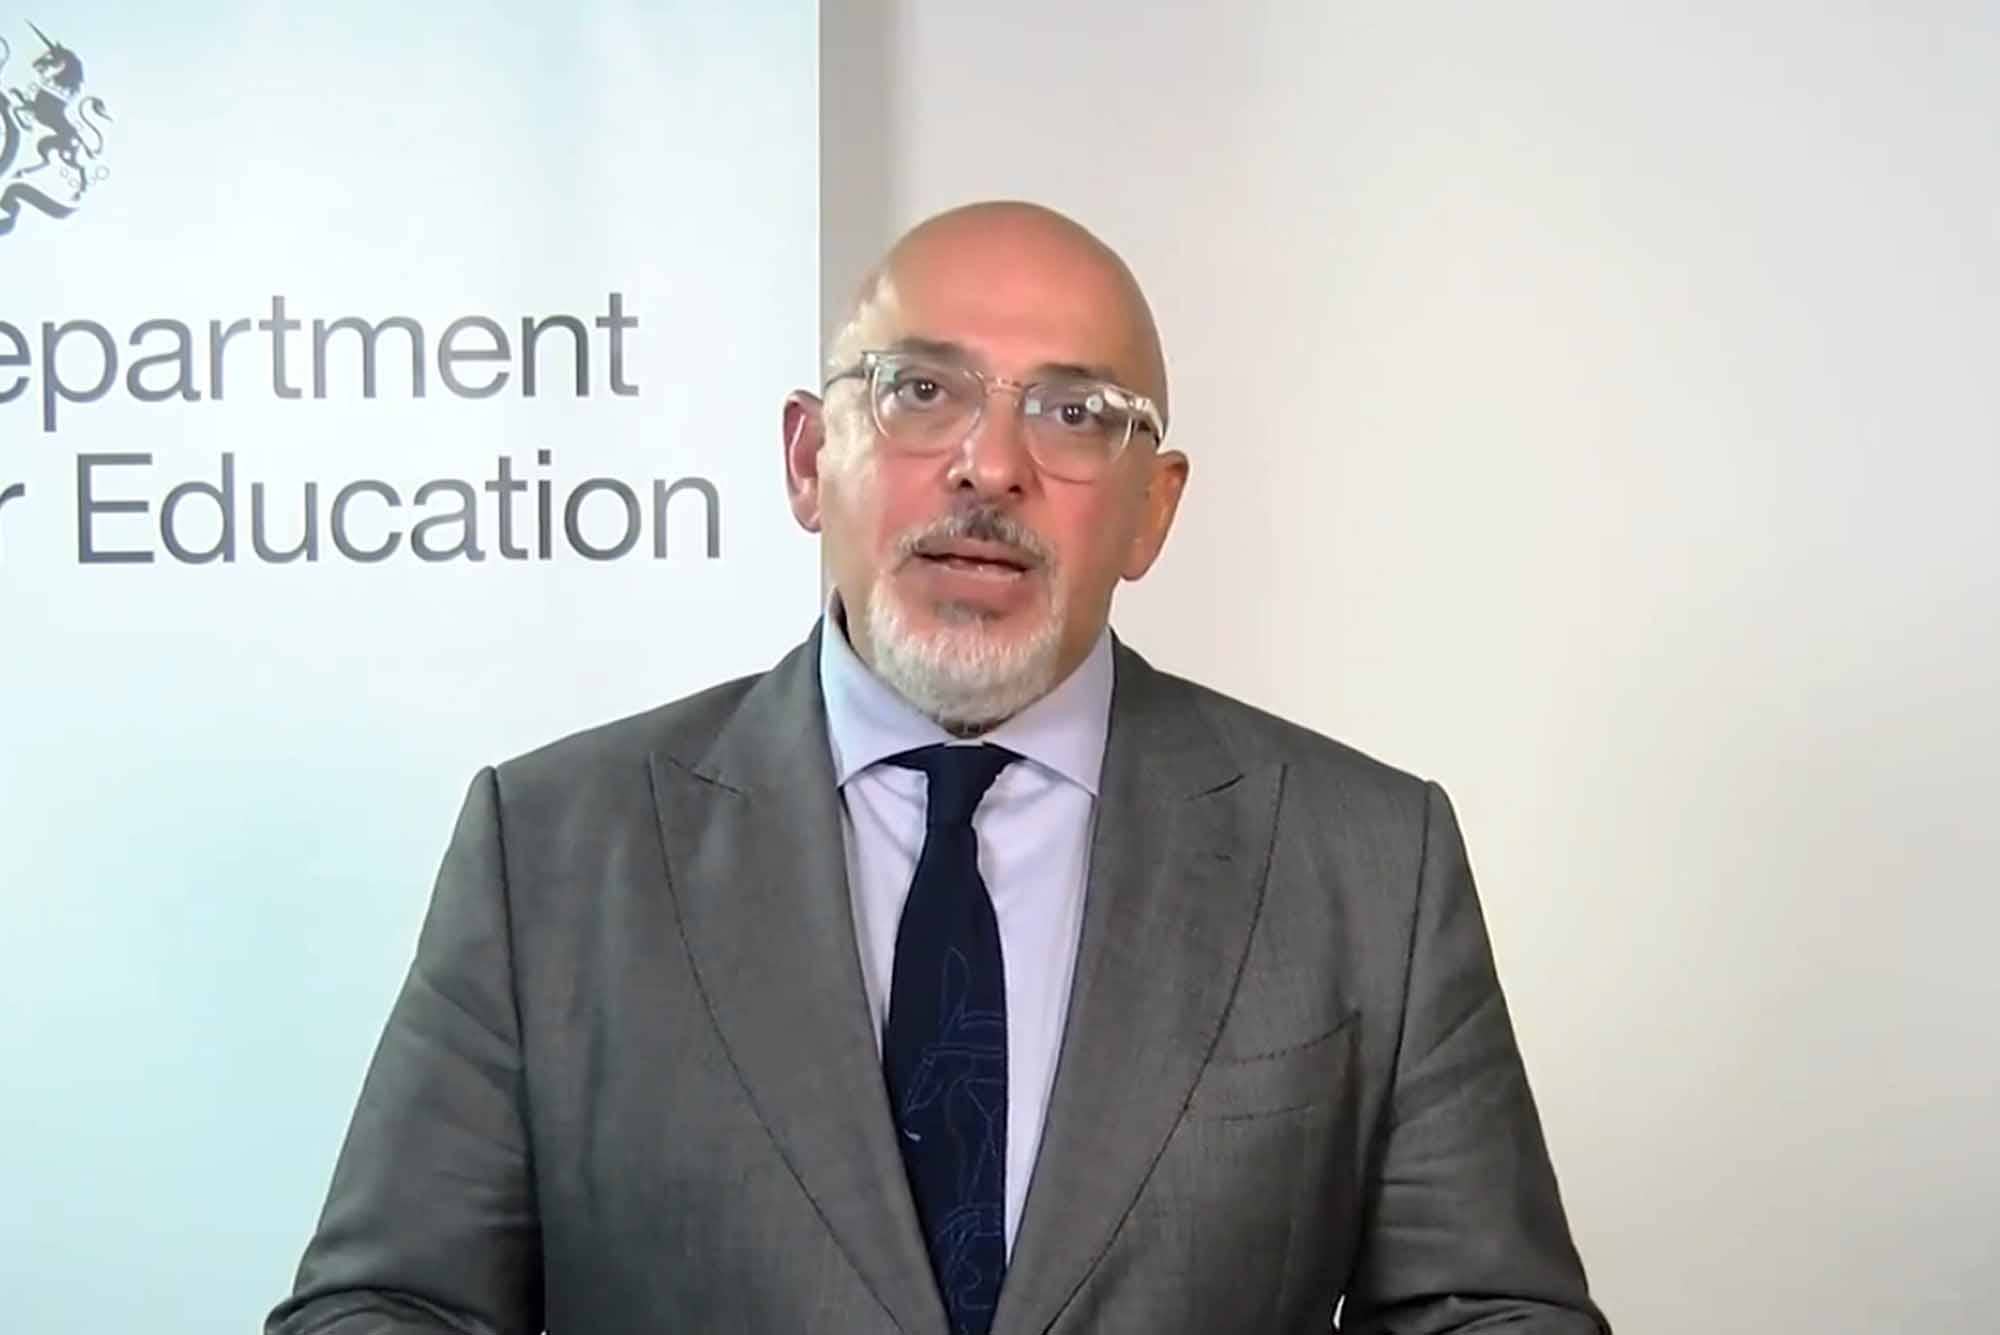 UK’s education secretary, Nadhim Zahawi announced that they will be taking several measures to bring the issue of climate change into the education system.